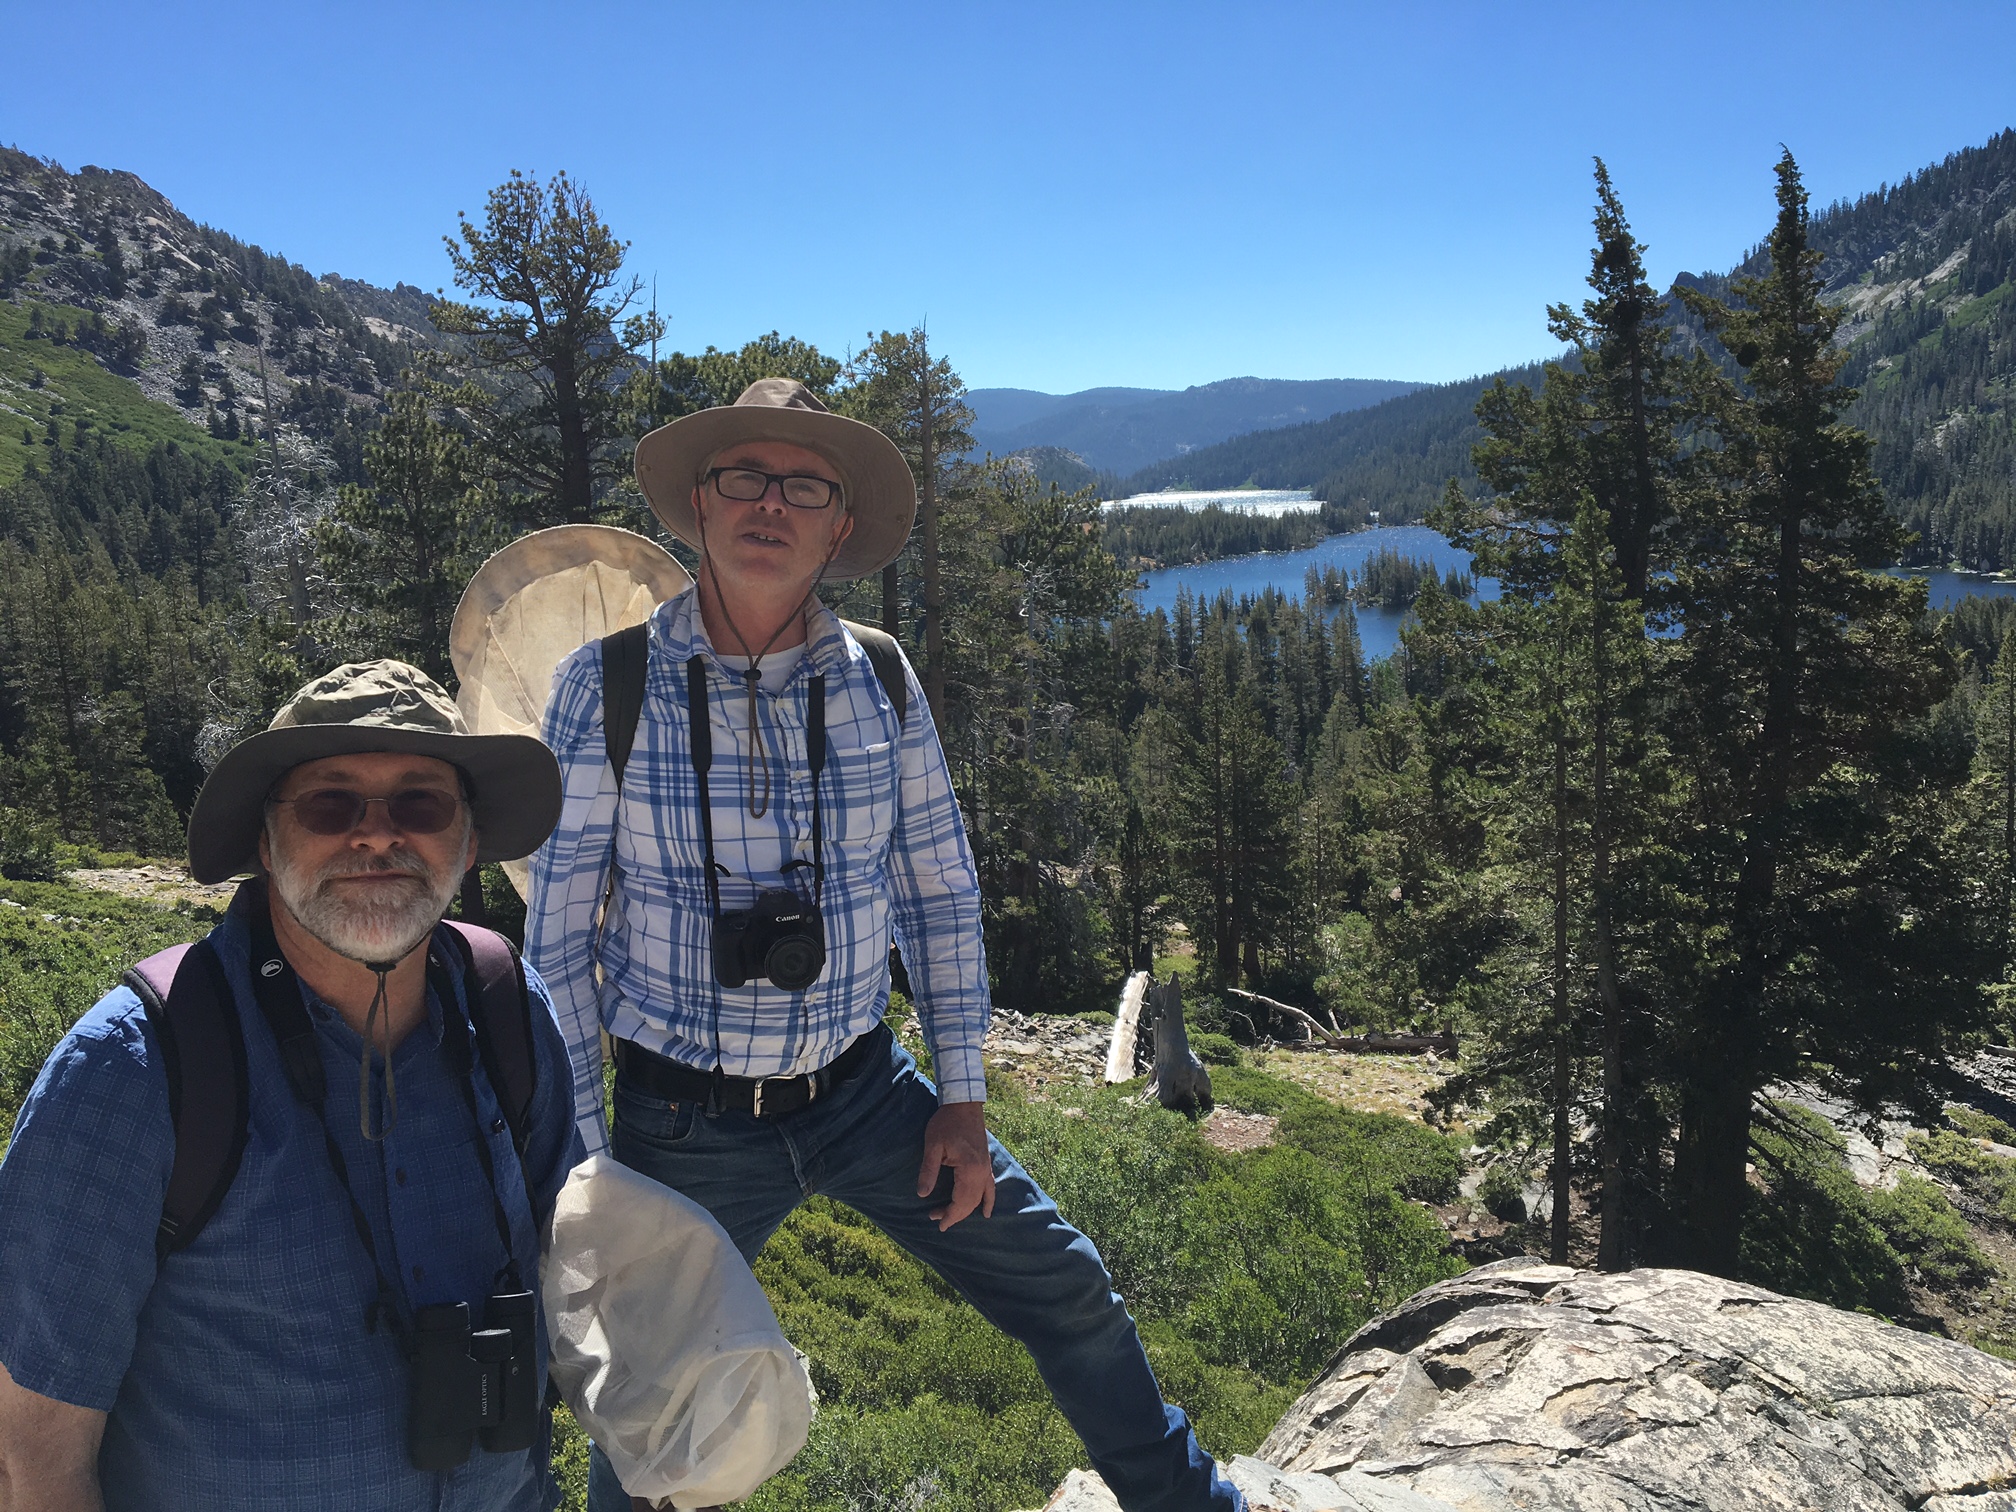 Two men, carrying butterfly nets and wearing sun hats, stand in a mountain valley, with pines behind and a view of a distant lake.